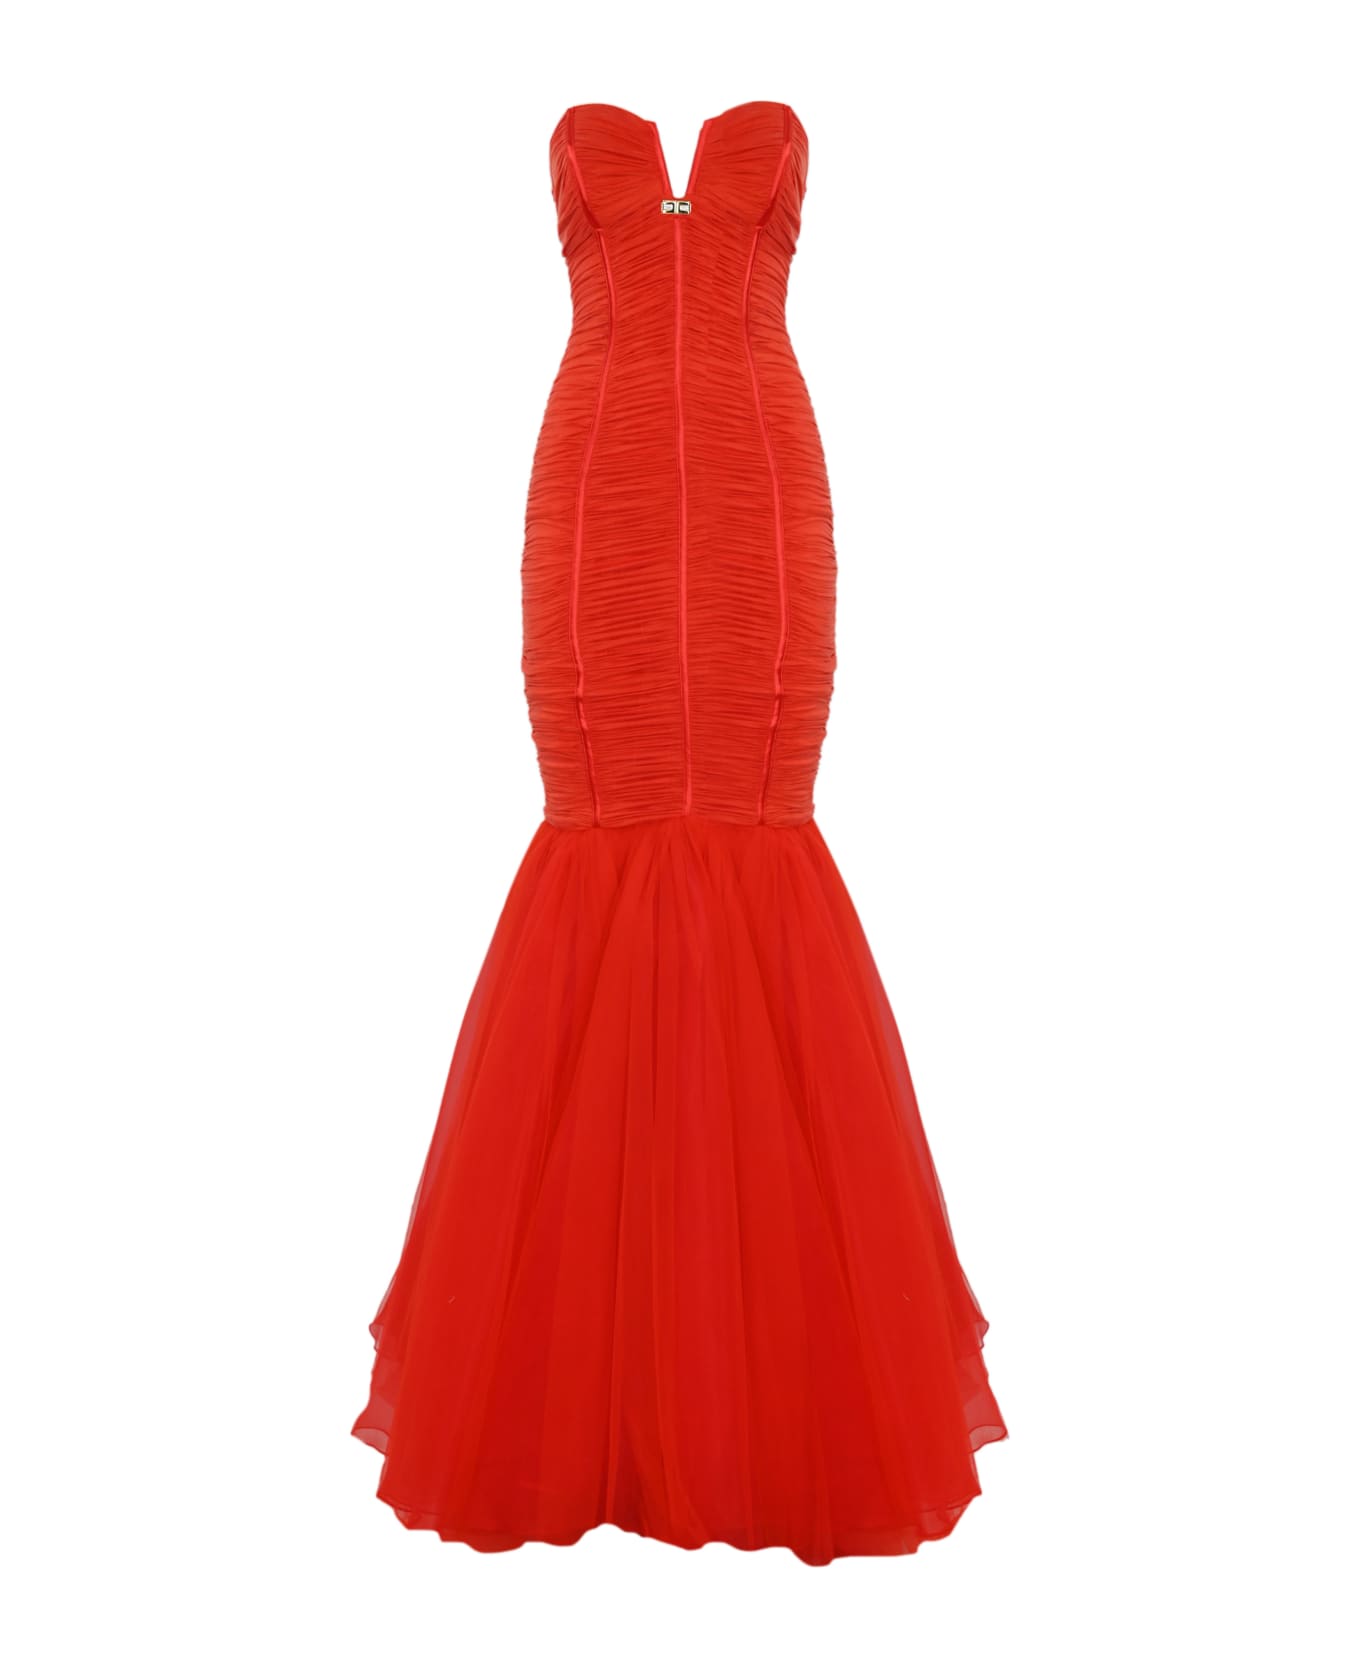 Elisabetta Franchi Red Carpet Dress In Jersey And Tulle - Corallo ワンピース＆ドレス